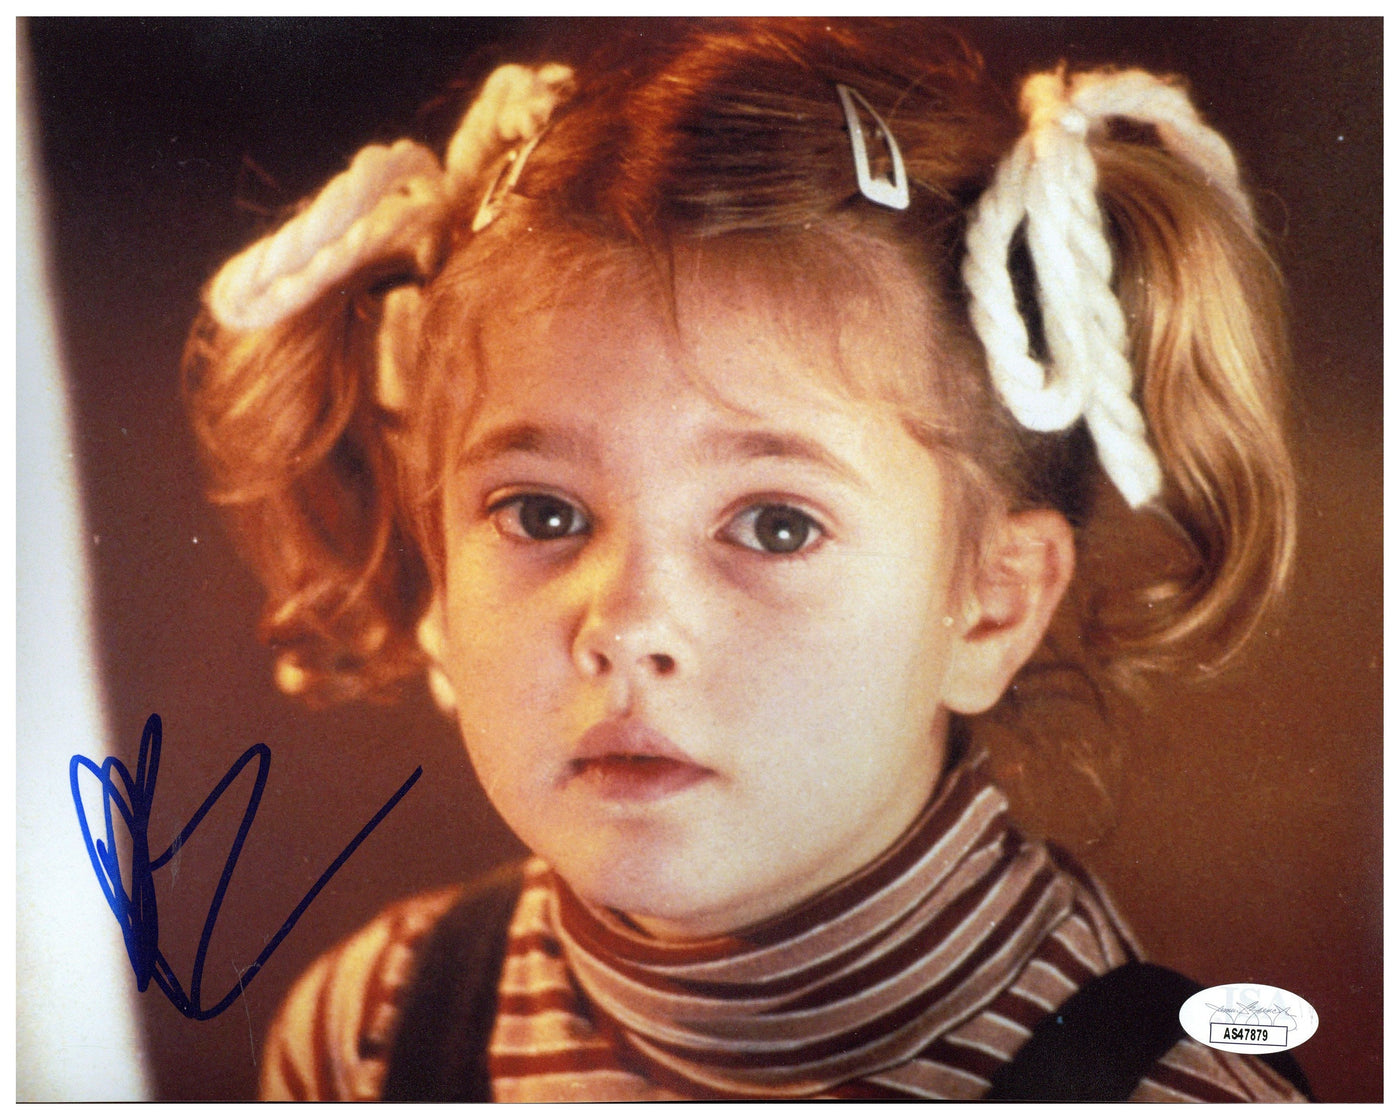 Drew Barrymore Signed 8x10 Photo E.T. The Extra-Terrestrial Autographed JSA COA 2